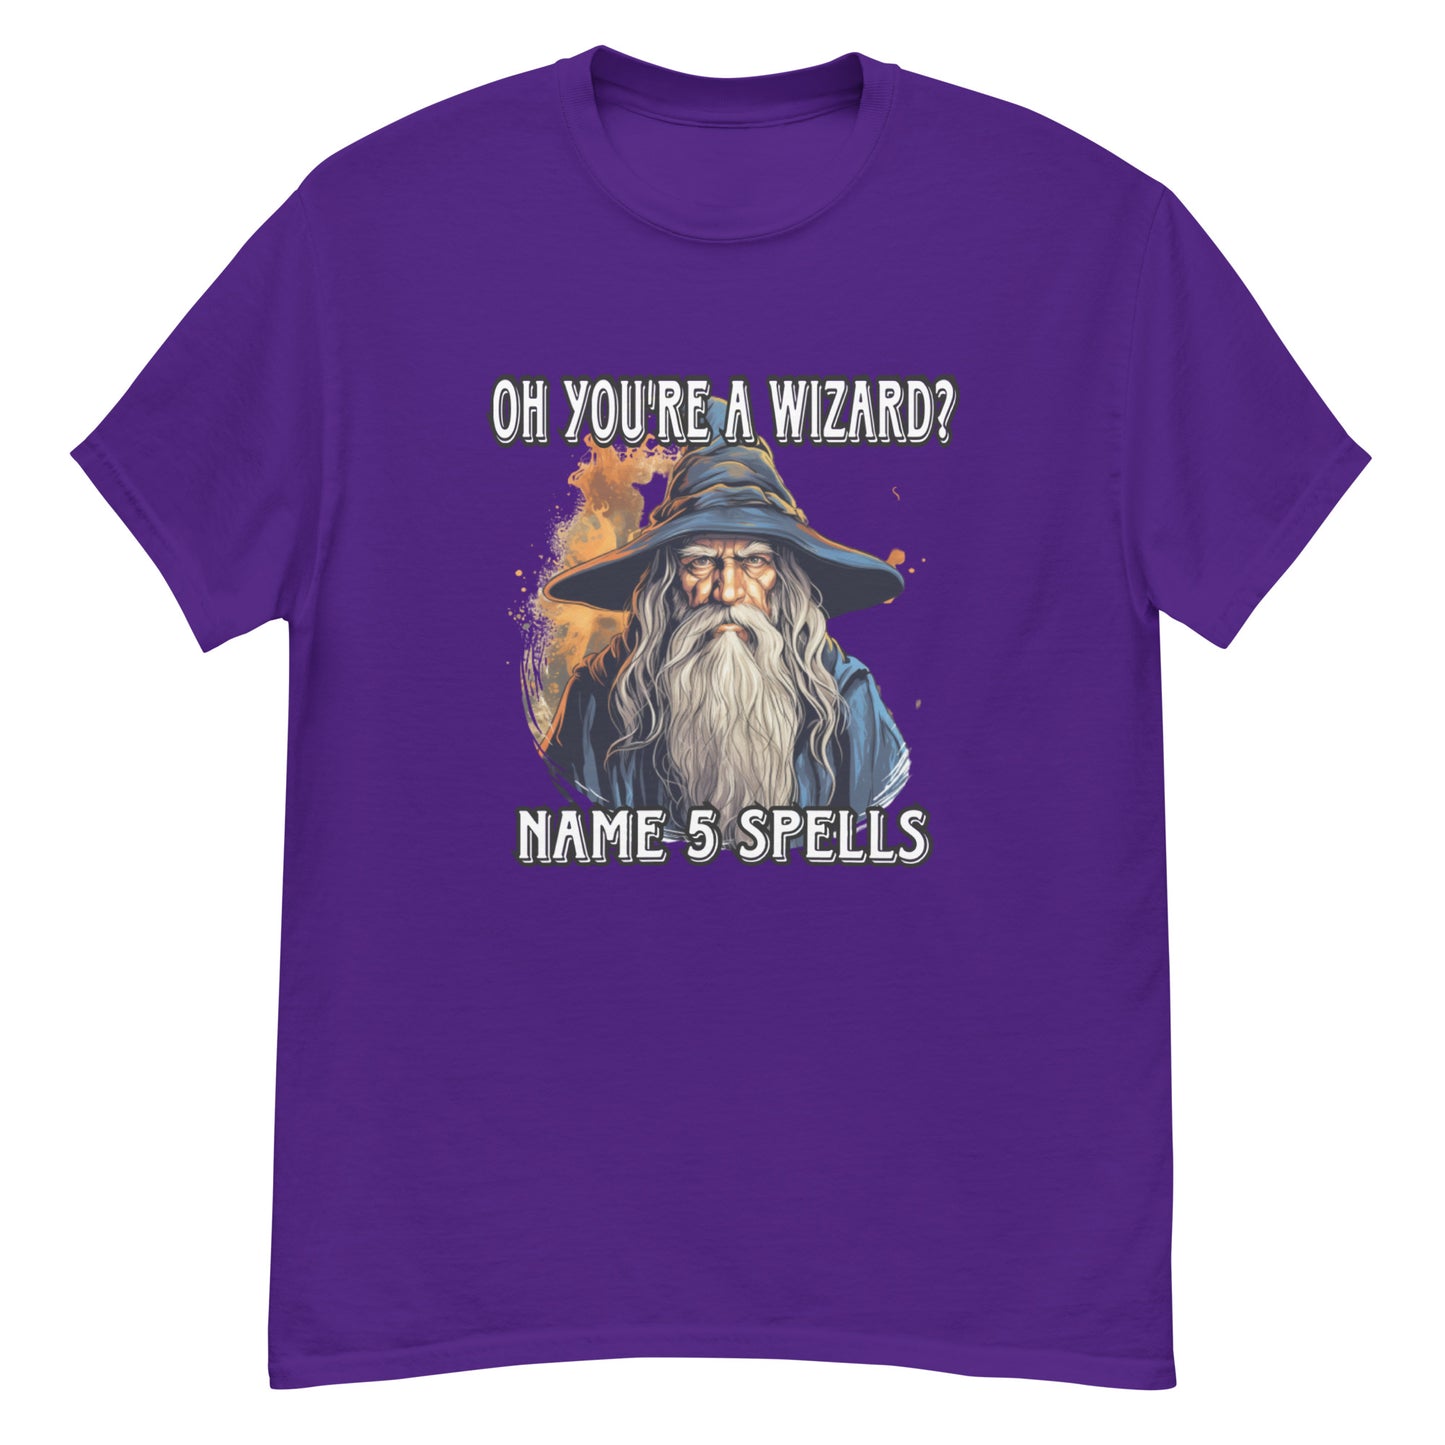 Oh you’re a wizard? Name 5 spells